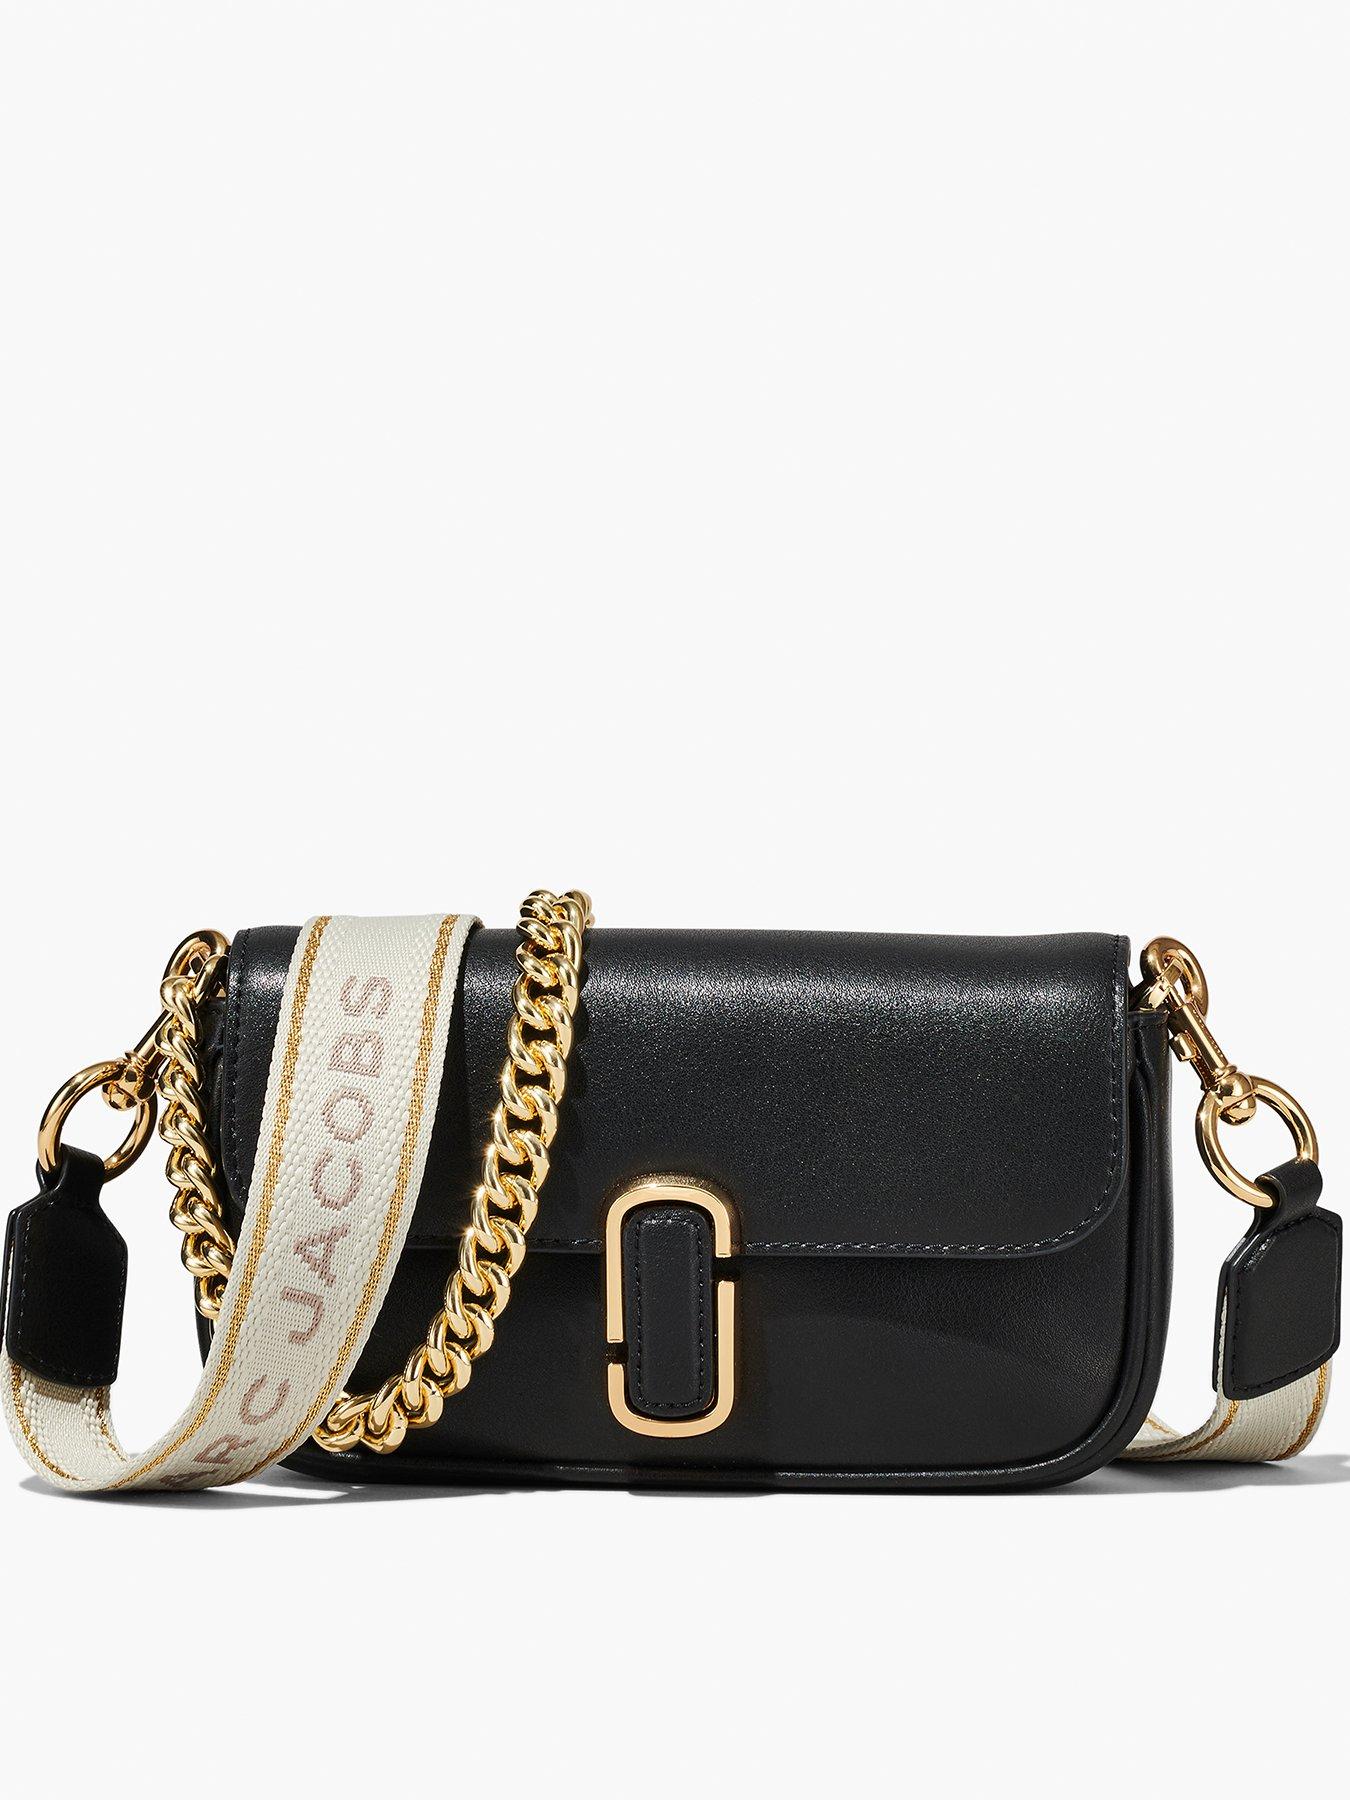 Marc Jacobs Leather Shoulder REPLACEMENT STRAP ONLY- Off White